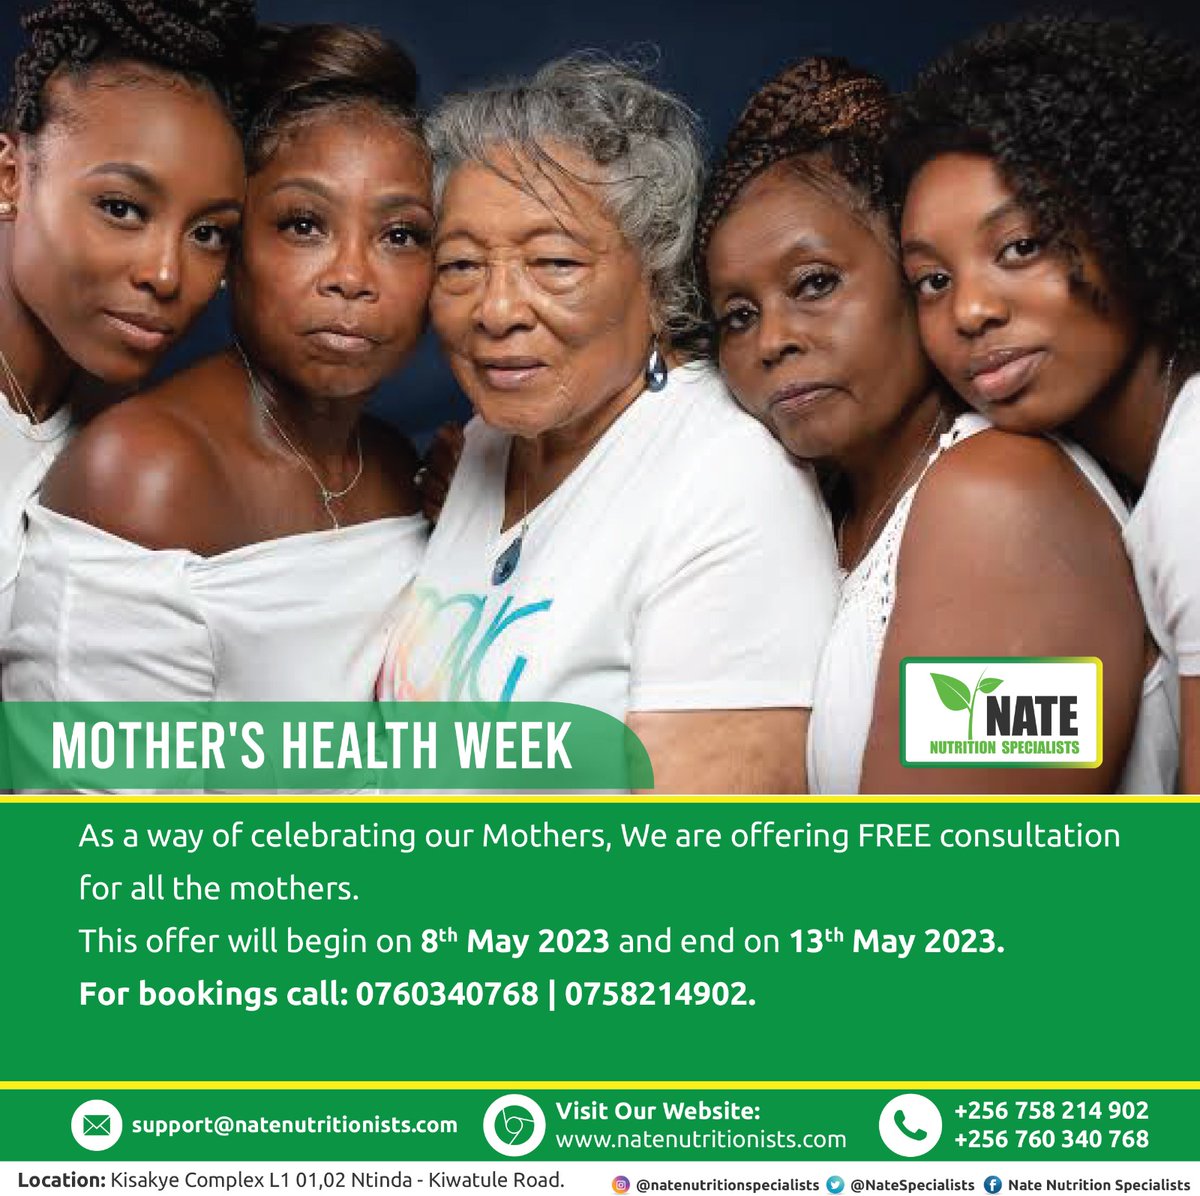 Here is an opportunity for all the mothers. 

A free health and wellness consultation. This runs for the whole week.

Call 0760 340 768/ 0758 214 902 to book your appointment. 

#mothersday #mothersweek #healthymoms